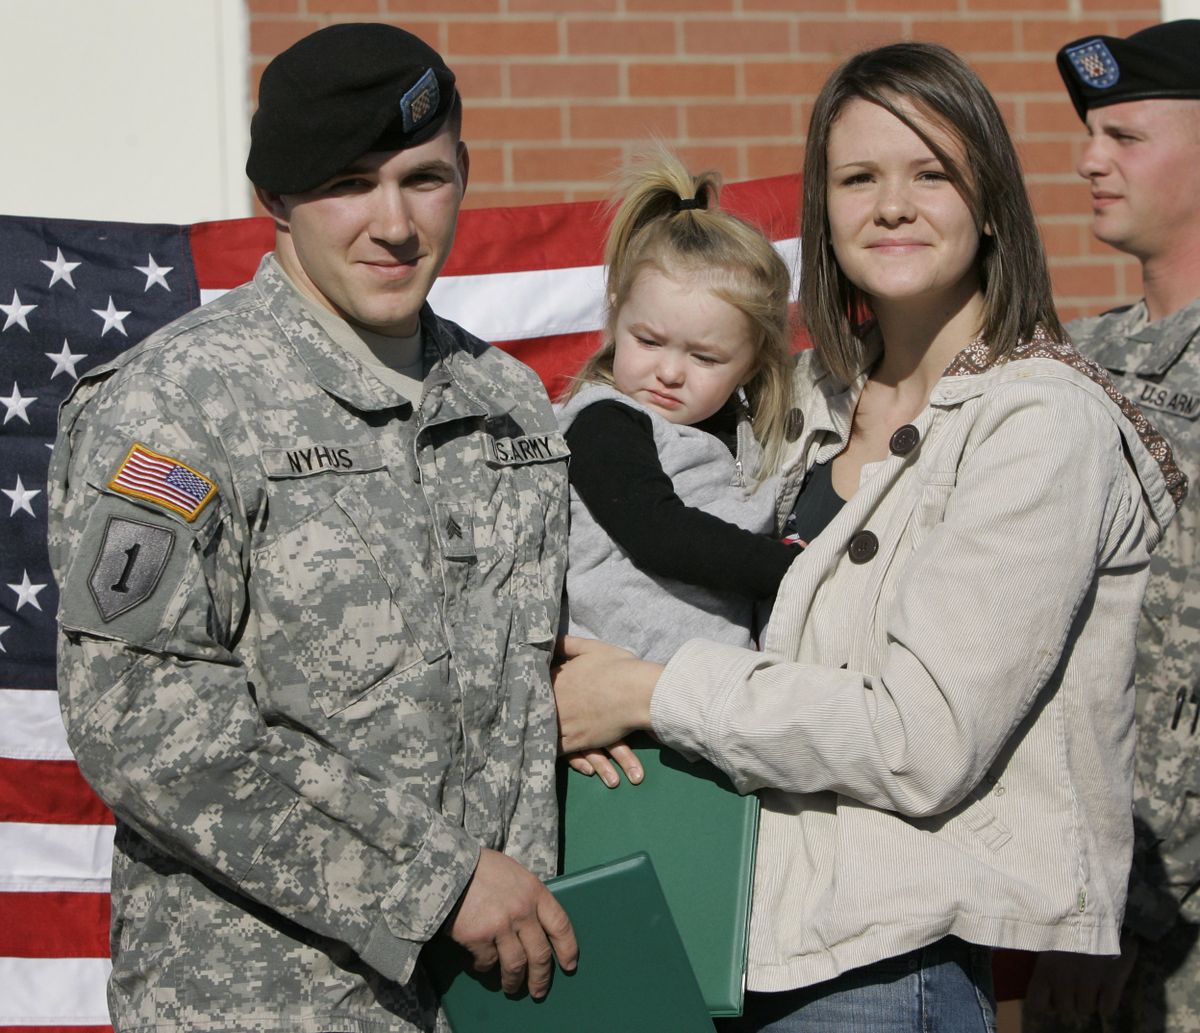 Sgt. Ryan Nyhus poses with his wife, Ashley, right, and daughter, Caidence, following a re-enlistment ceremony at Fort Riley, Kan. (Associated Press / The Spokesman-Review)